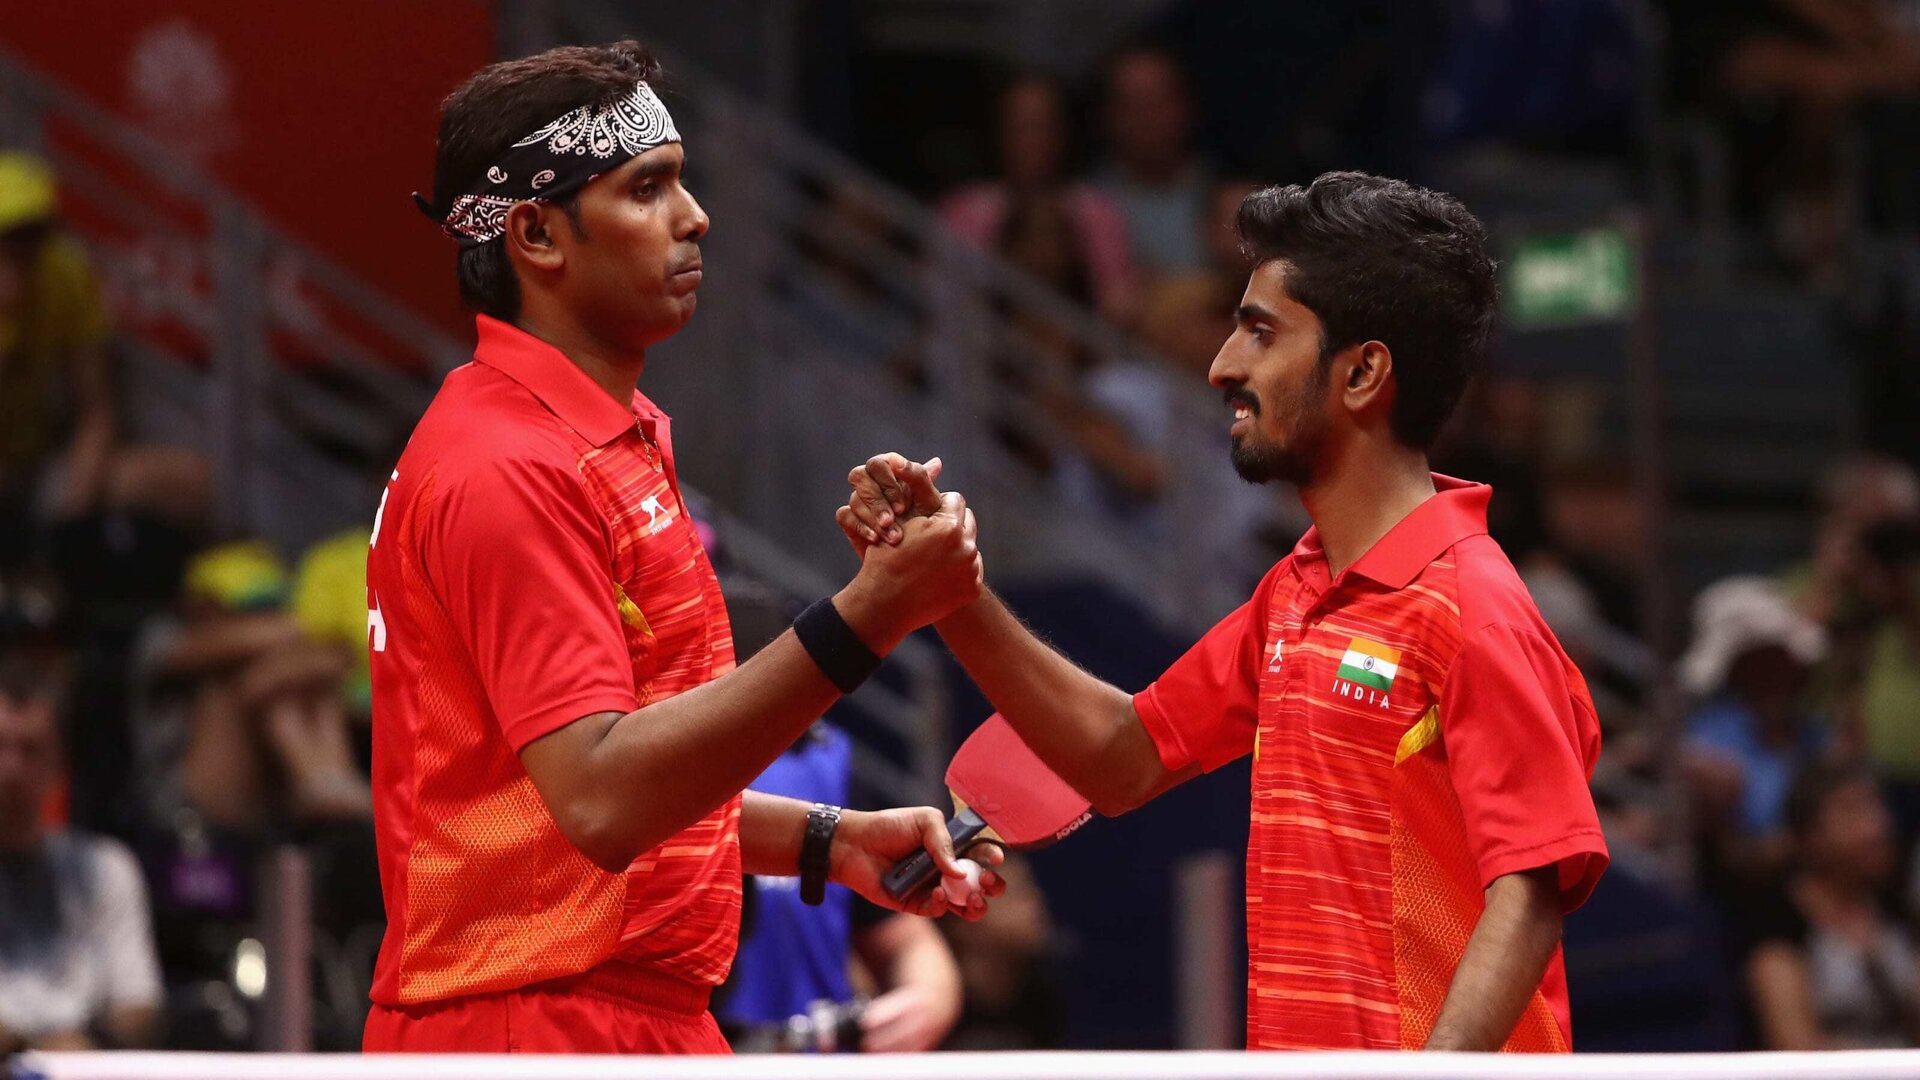 Indian paddlers win three medals at Asian Table Tennis Championships